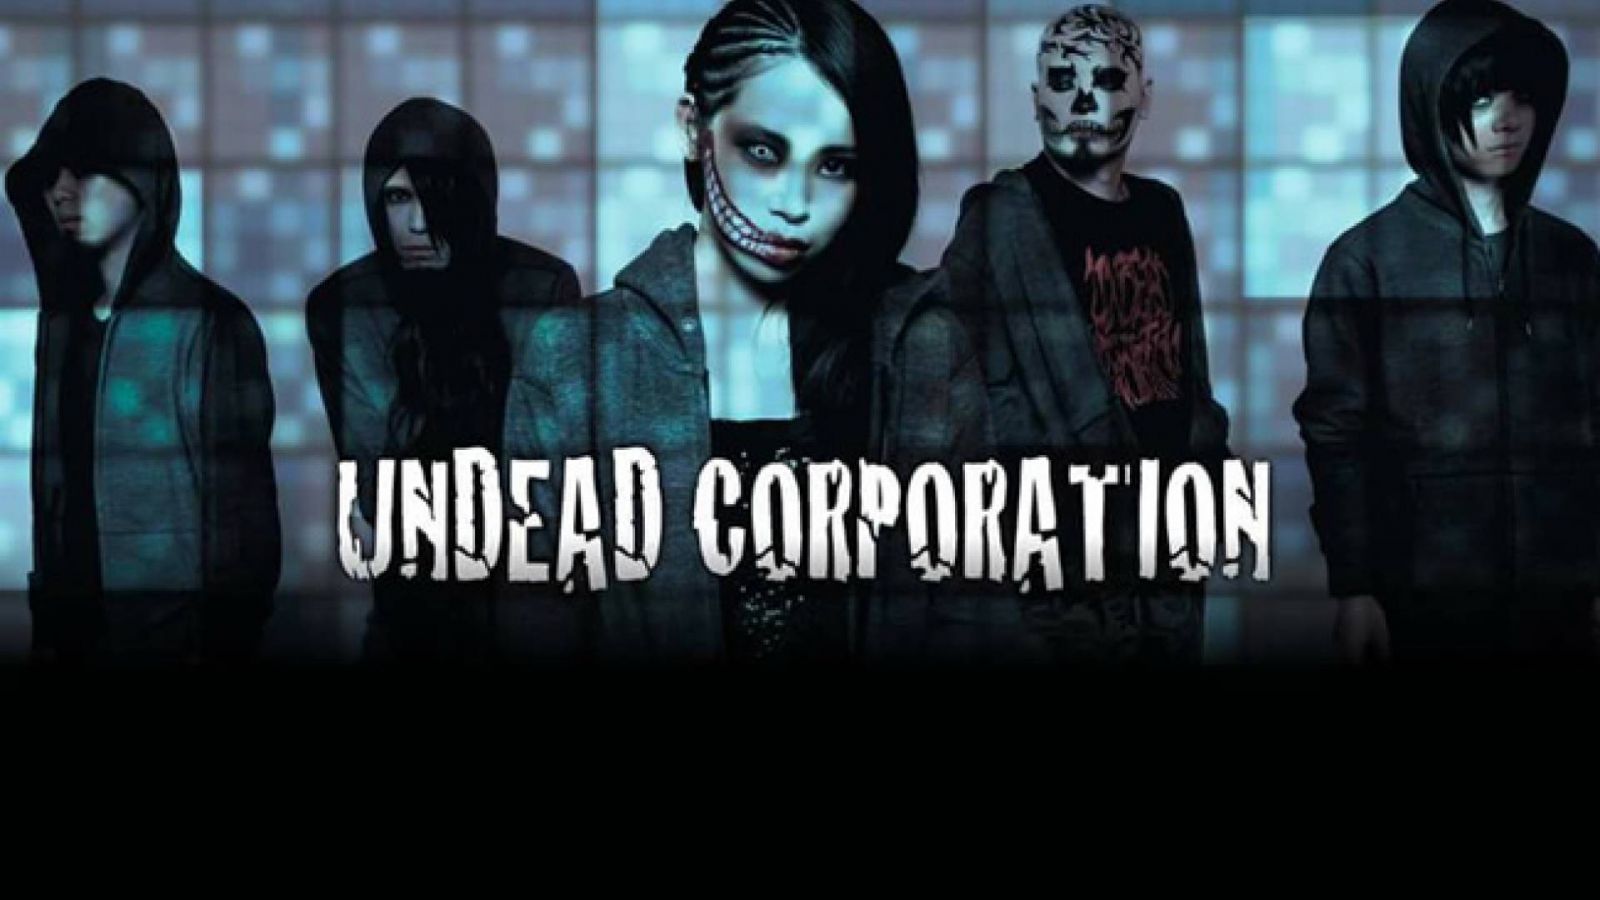 Wywiad z UNDEAD CORPORATION © 2015 UNDEAD CORPORATION. All rights reserved.